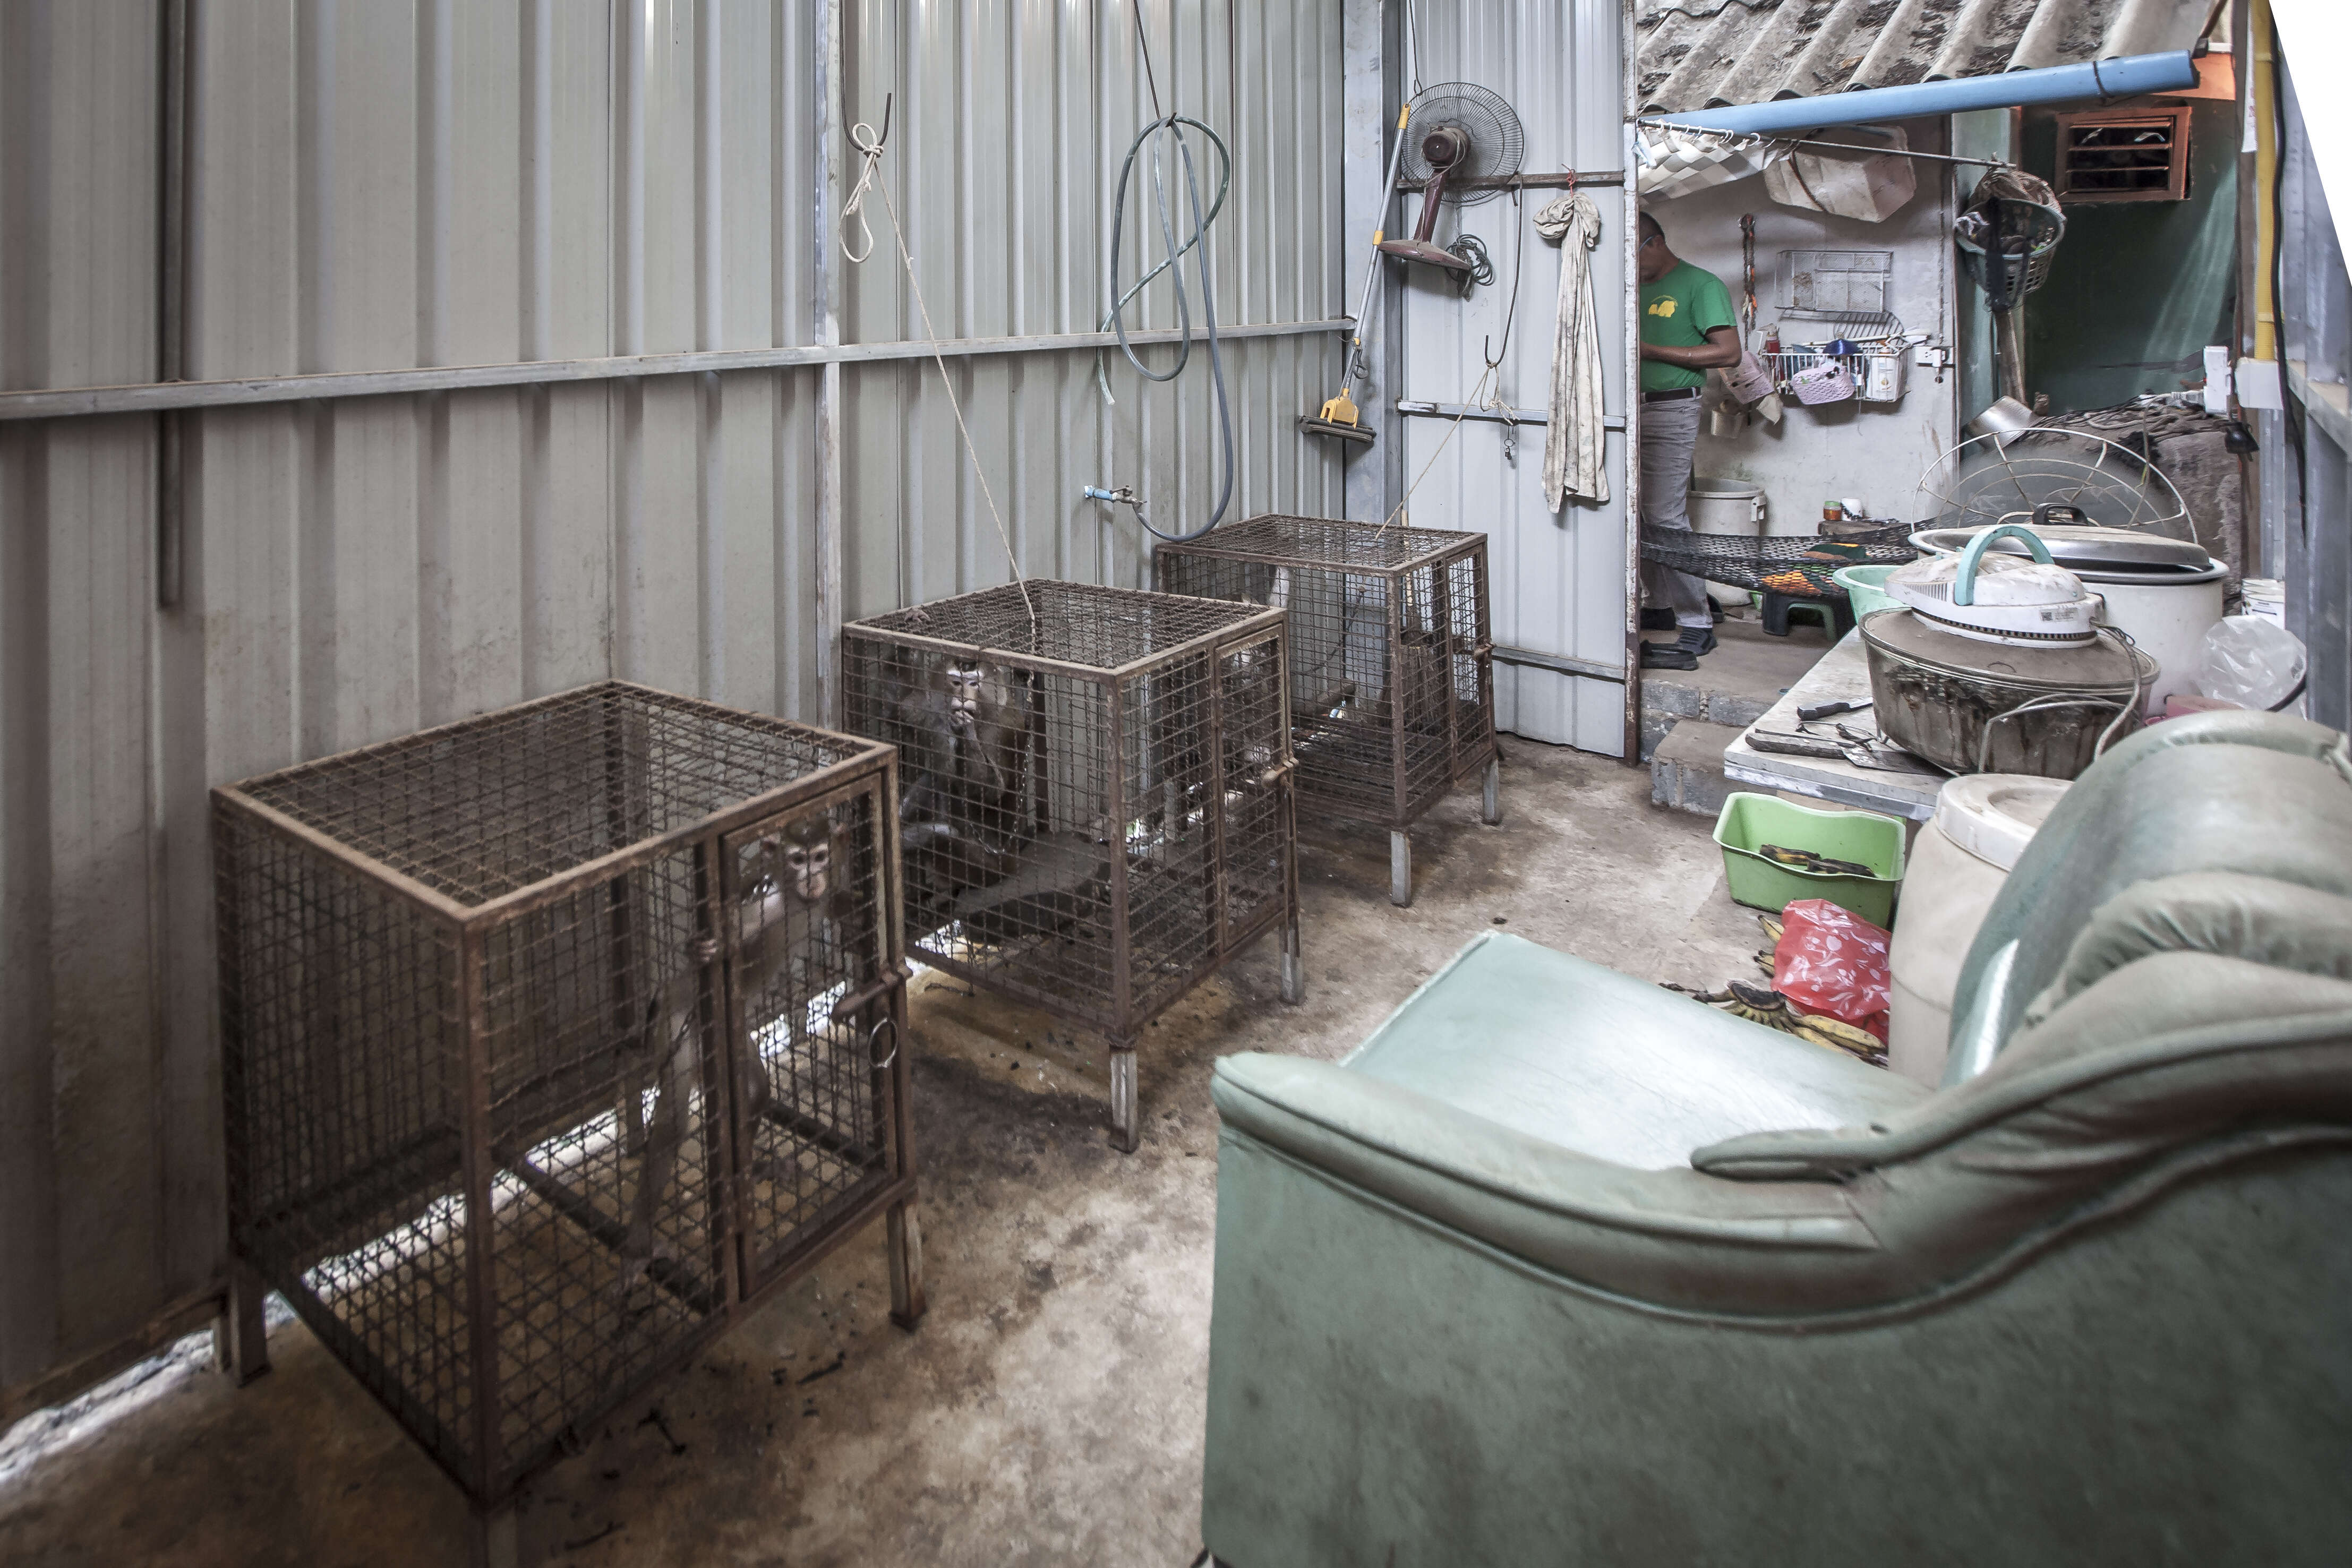 Macaque monkeys locked up in cages